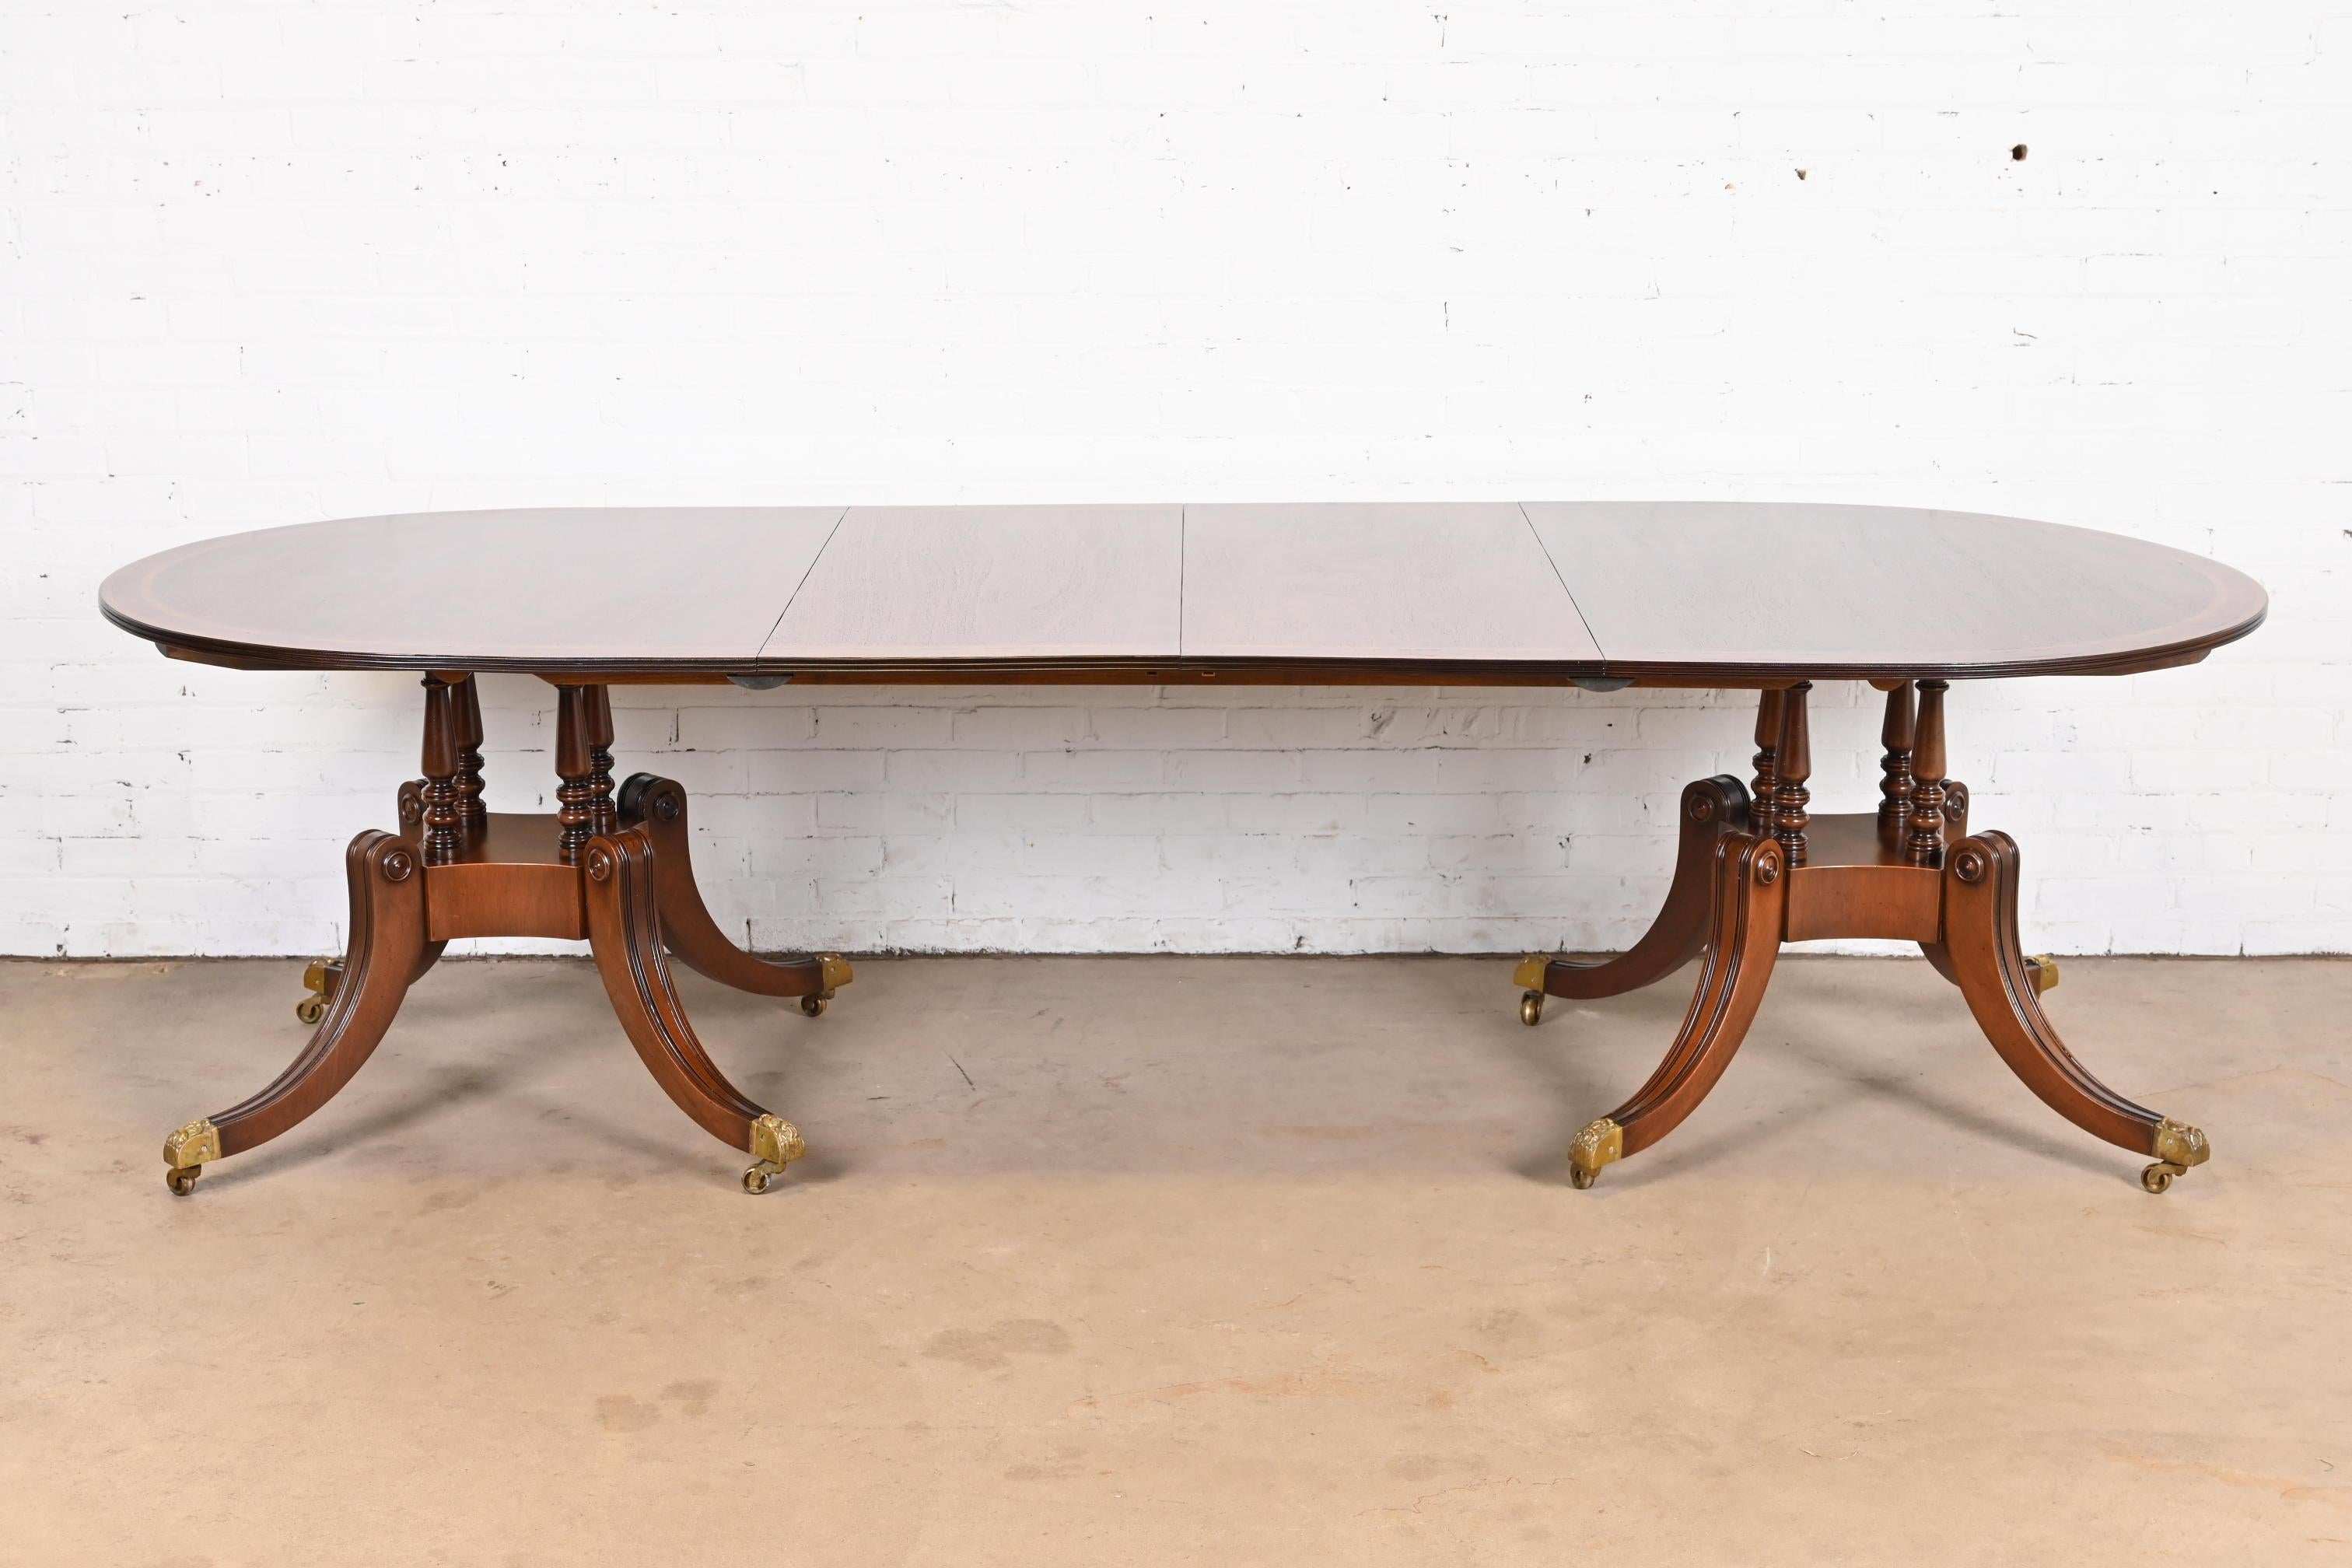 An exceptional Georgian or Regency style double pedestal extension dining table

In the manner of Baker Furniture

USA, Circa Mid-20th Century

Gorgeous mahogany, with satinwood and rosewood banding, carved solid mahogany pedestals, brass-capped paw